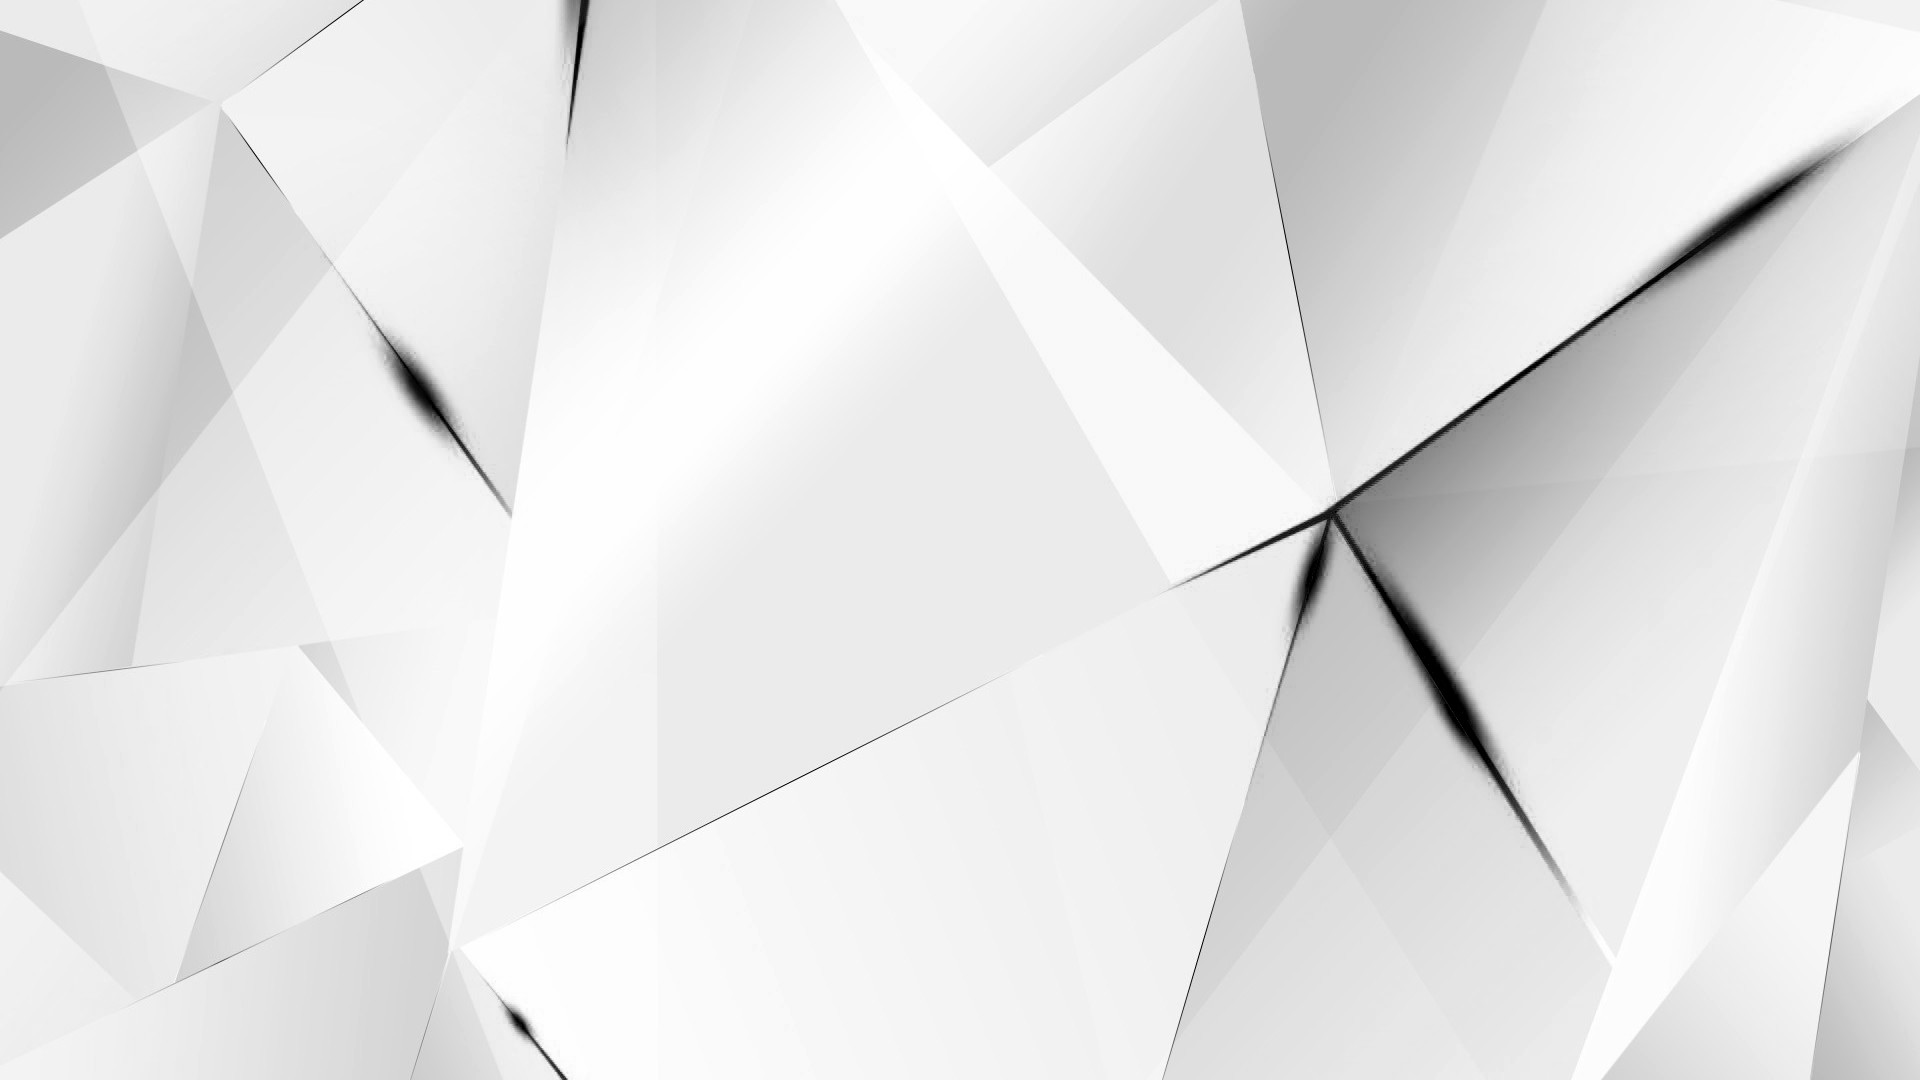 Wallpapers – Black Abstract Polygons White BG by kaminohunter